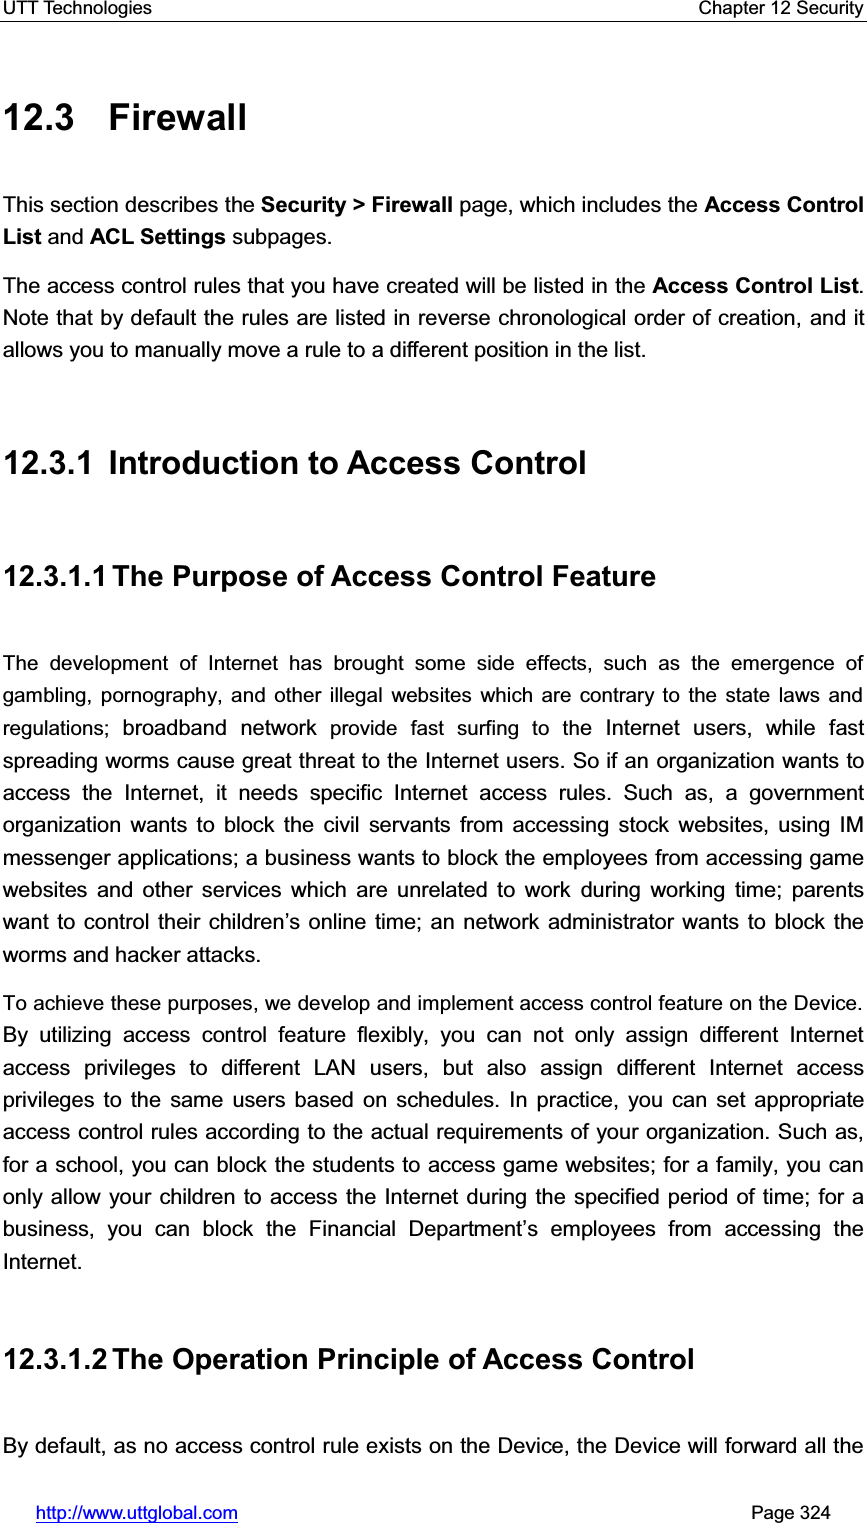 UTT Technologies    Chapter 12 Security   http://www.uttglobal.com                                                       Page 324 12.3 Firewall This section describes the Security &gt; Firewall page, which includes the Access Control List and ACL Settings subpages.   The access control rules that you have created will be listed in the Access Control List.Note that by default the rules are listed in reverse chronological order of creation, and it allows you to manually move a rule to a different position in the list. 12.3.1 Introduction to Access Control 12.3.1.1 The Purpose of Access Control Feature The development of Internet has brought some side effects, such as the emergence of gambling, pornography, and other illegal websites which are contrary to the state laws and regulations; broadband network provide fast surfing to the Internet users, while fast spreading worms cause great threat to the Internet users. So if an organization wants to access the Internet, it needs specific Internet access rules. Such as, a government organization wants to block the civil servants from accessing stock websites, using IM messenger applications; a business wants to block the employees from accessing game websites and other services which are unrelated to work during working time; parents want to control their children¶s online time; an network administrator wants to block the worms and hacker attacks. To achieve these purposes, we develop and implement access control feature on the Device. By utilizing access control feature flexibly, you can not only assign different Internet access privileges to different LAN users, but also assign different Internet access privileges to the same users based on schedules. In practice, you can set appropriate access control rules according to the actual requirements of your organization. Such as, for a school, you can block the students to access game websites; for a family, you can only allow your children to access the Internet during the specified period of time; for a business, you can block the Financial Department¶s employees from accessing the Internet. 12.3.1.2 The Operation Principle of Access Control By default, as no access control rule exists on the Device, the Device will forward all the 